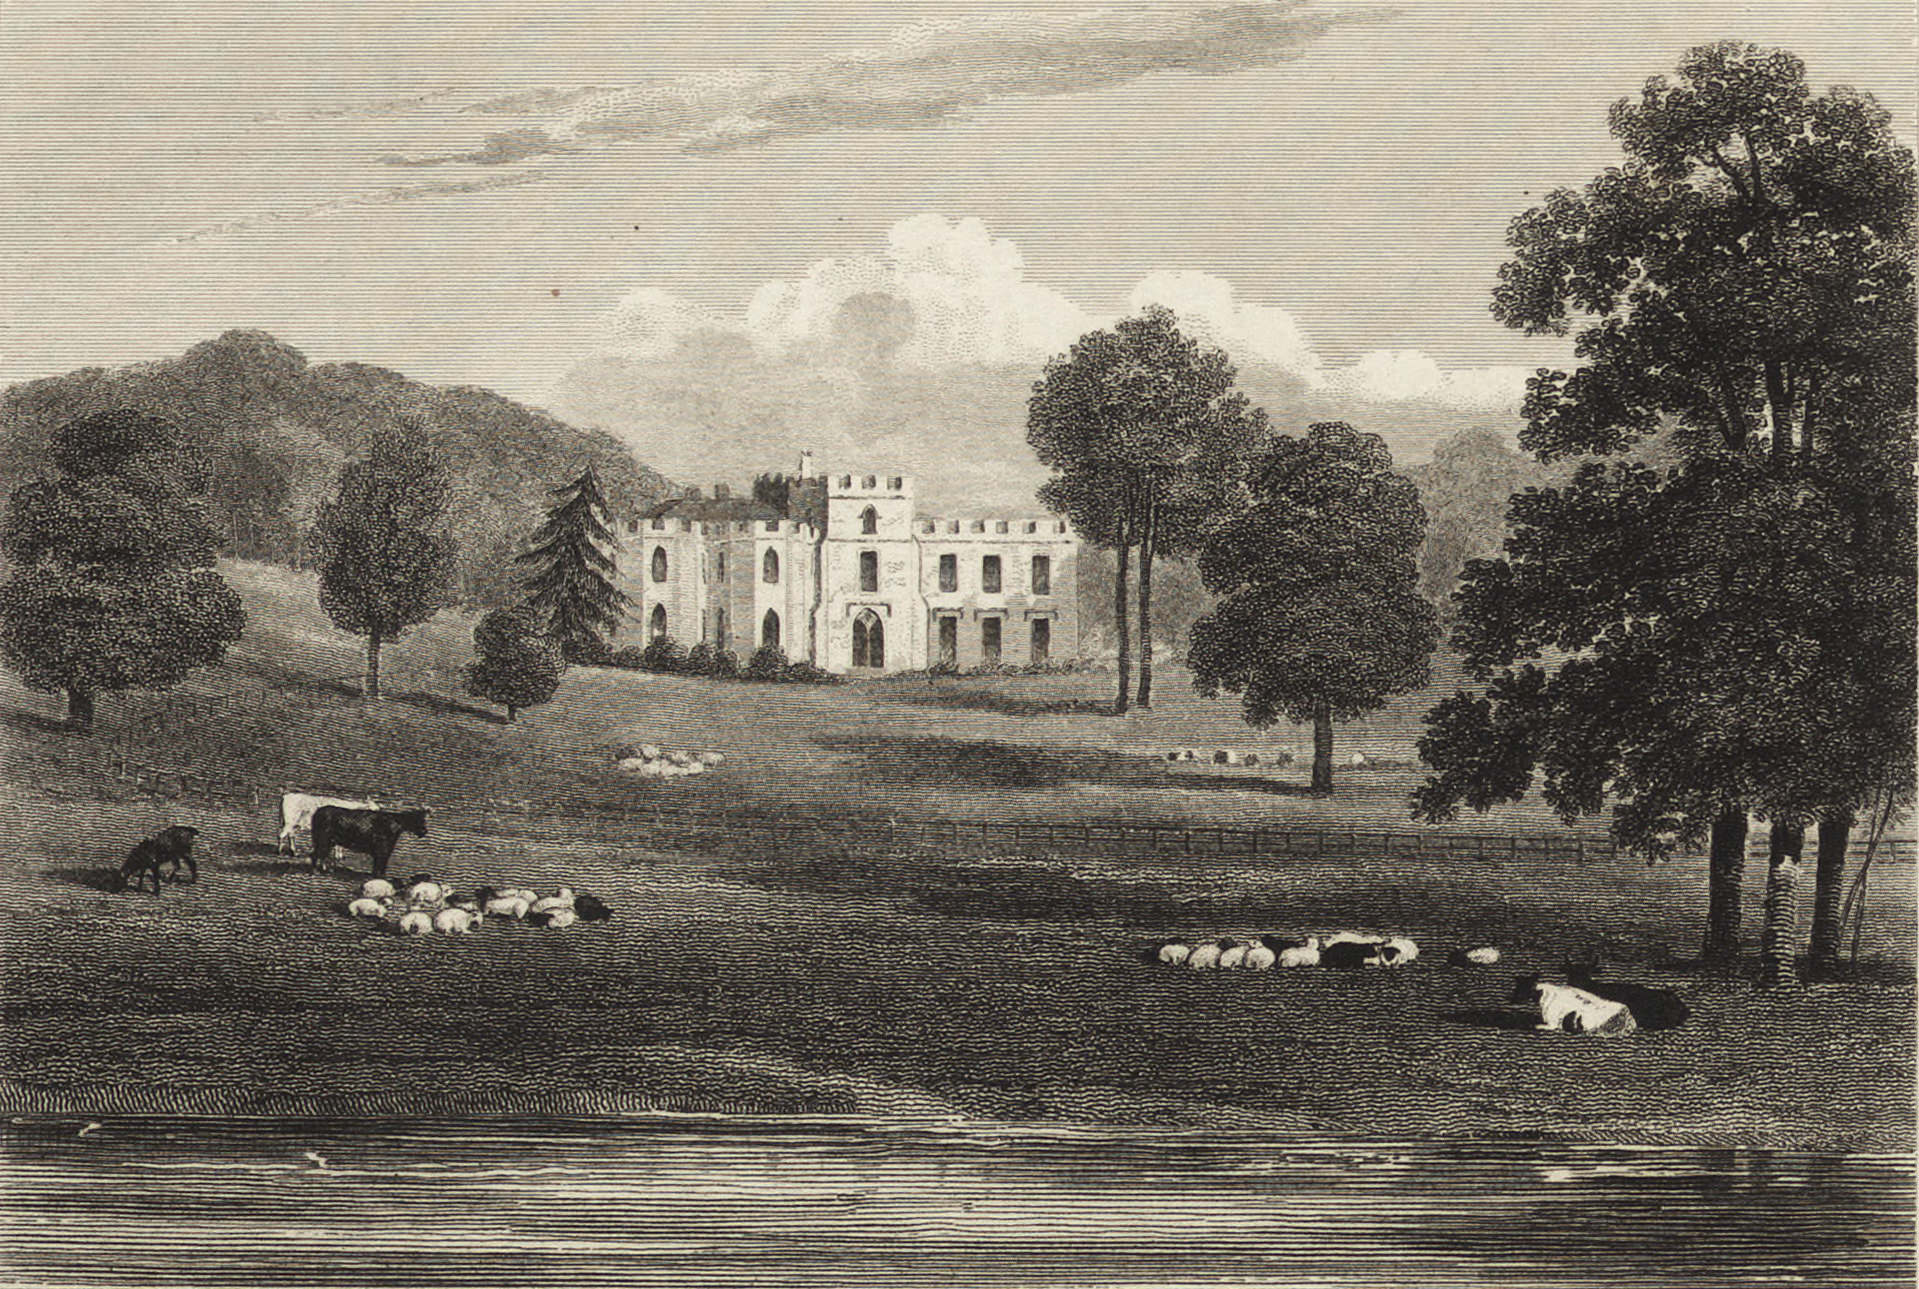 <i>Hertfordshire</i> in <i>Views of the Seats, Mansions, Castles, etcirca of Noblemen and Gentlemen in England</i>, Vol. 1 (London: Jones & Co. 1829), 151., 1829, engraving. Collection of Getty Research Institute (6575).